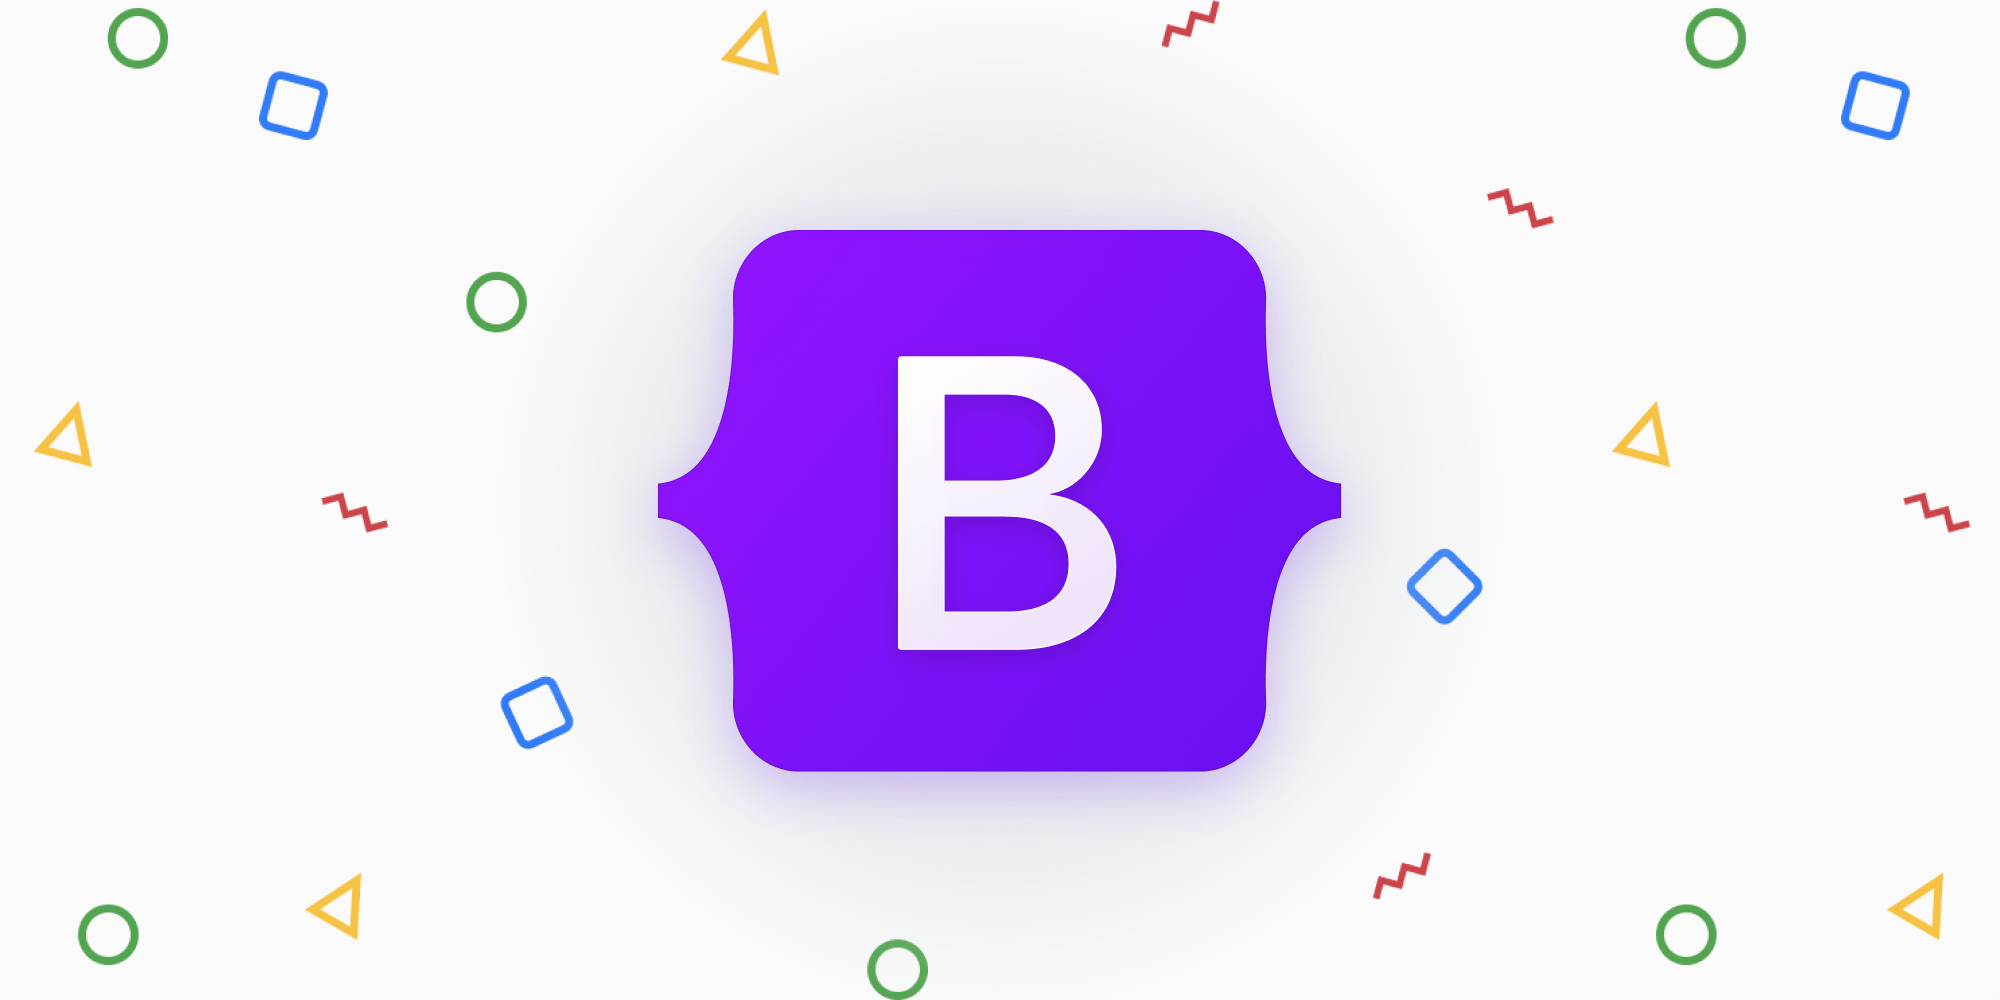 Bootstrap 5 Alpha is here!